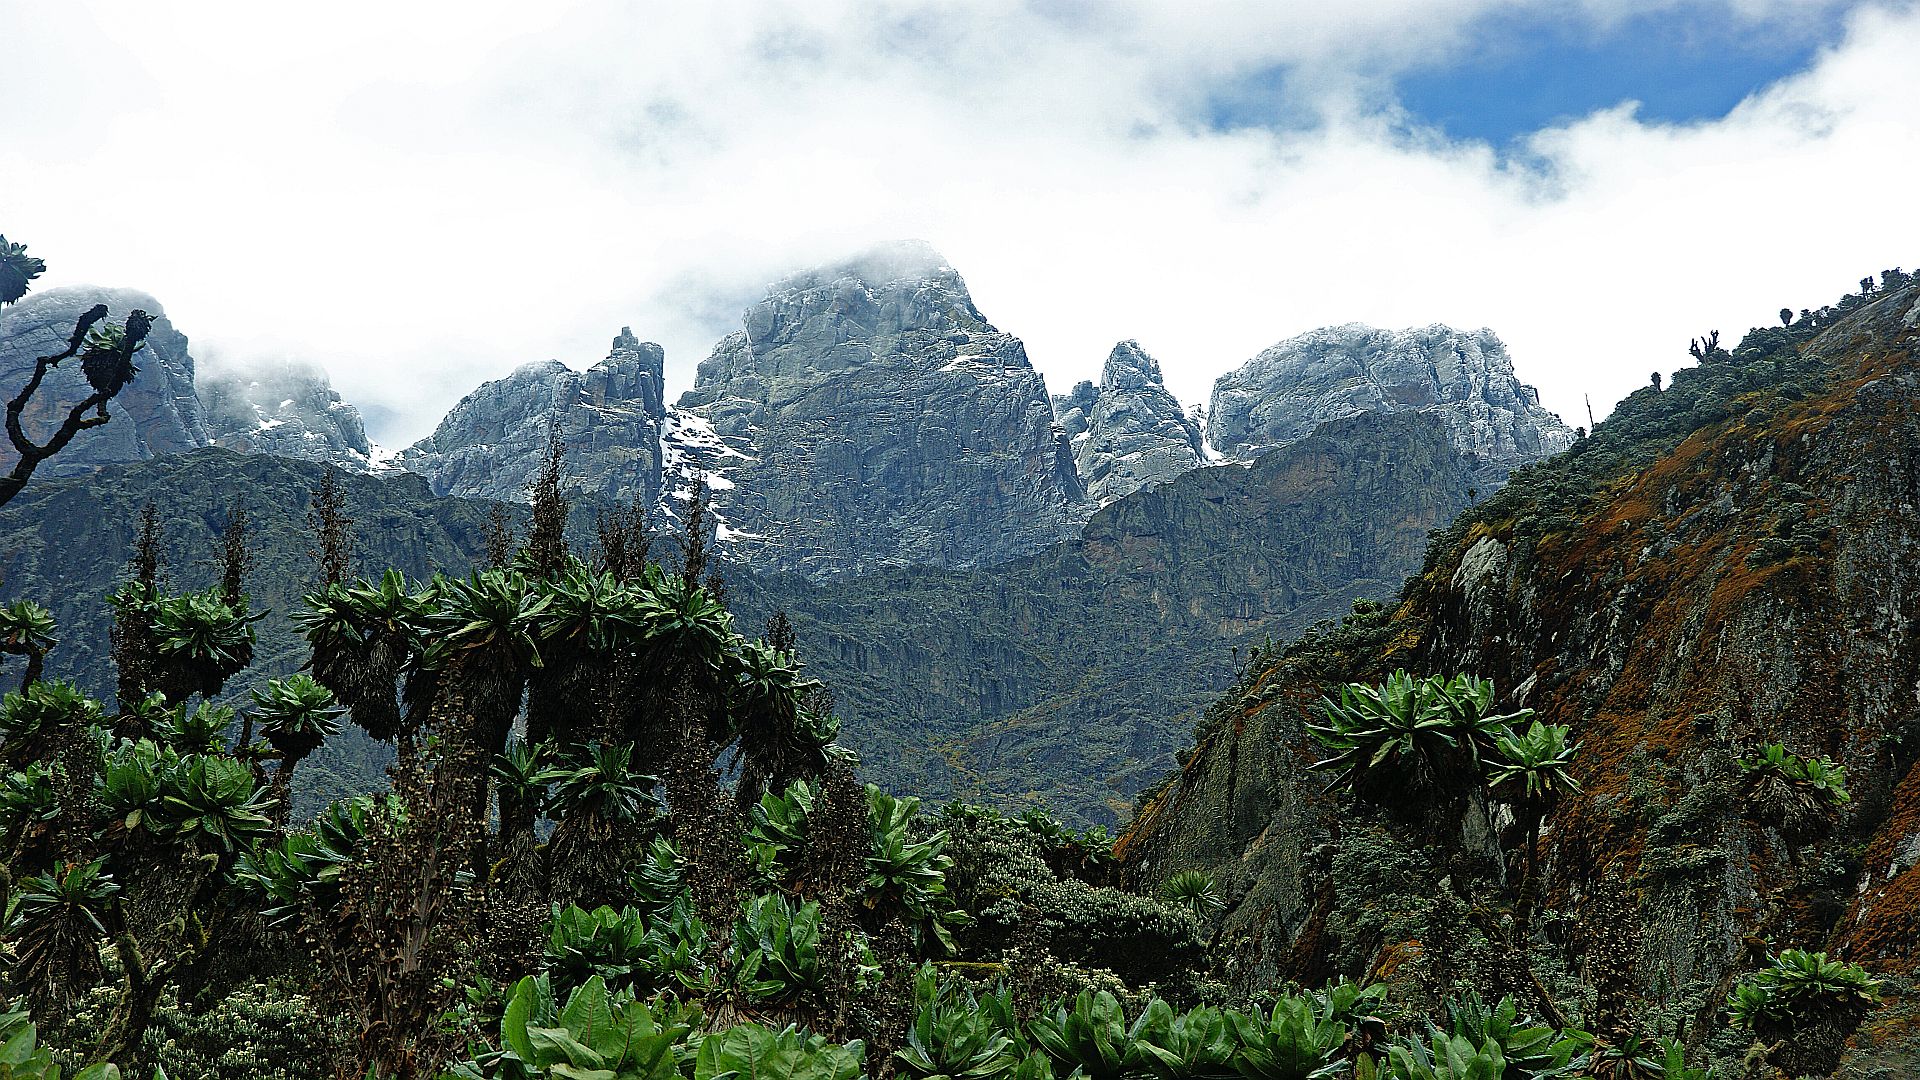 Explore Margherita Peak, Uganda's highest point, offering challenging climbs and breathtaking views in the Rwenzori Mountains.